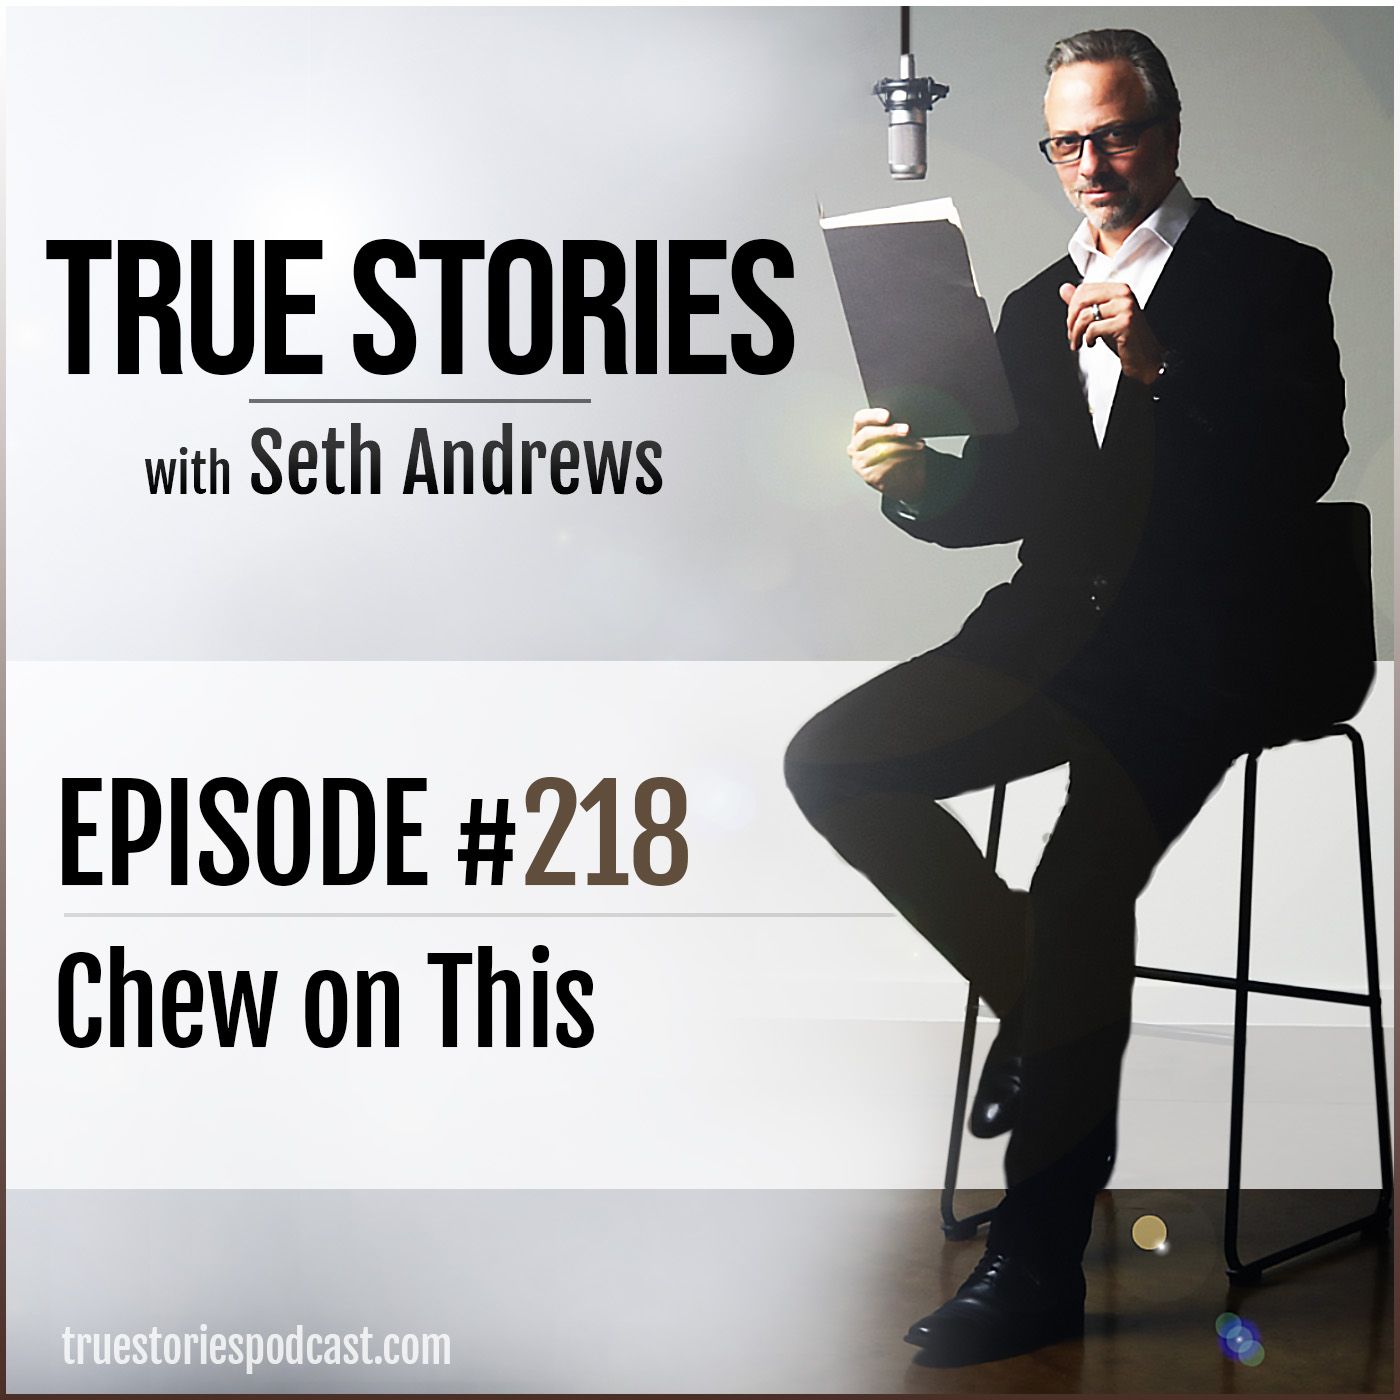 True Stories #218 - Chew on This